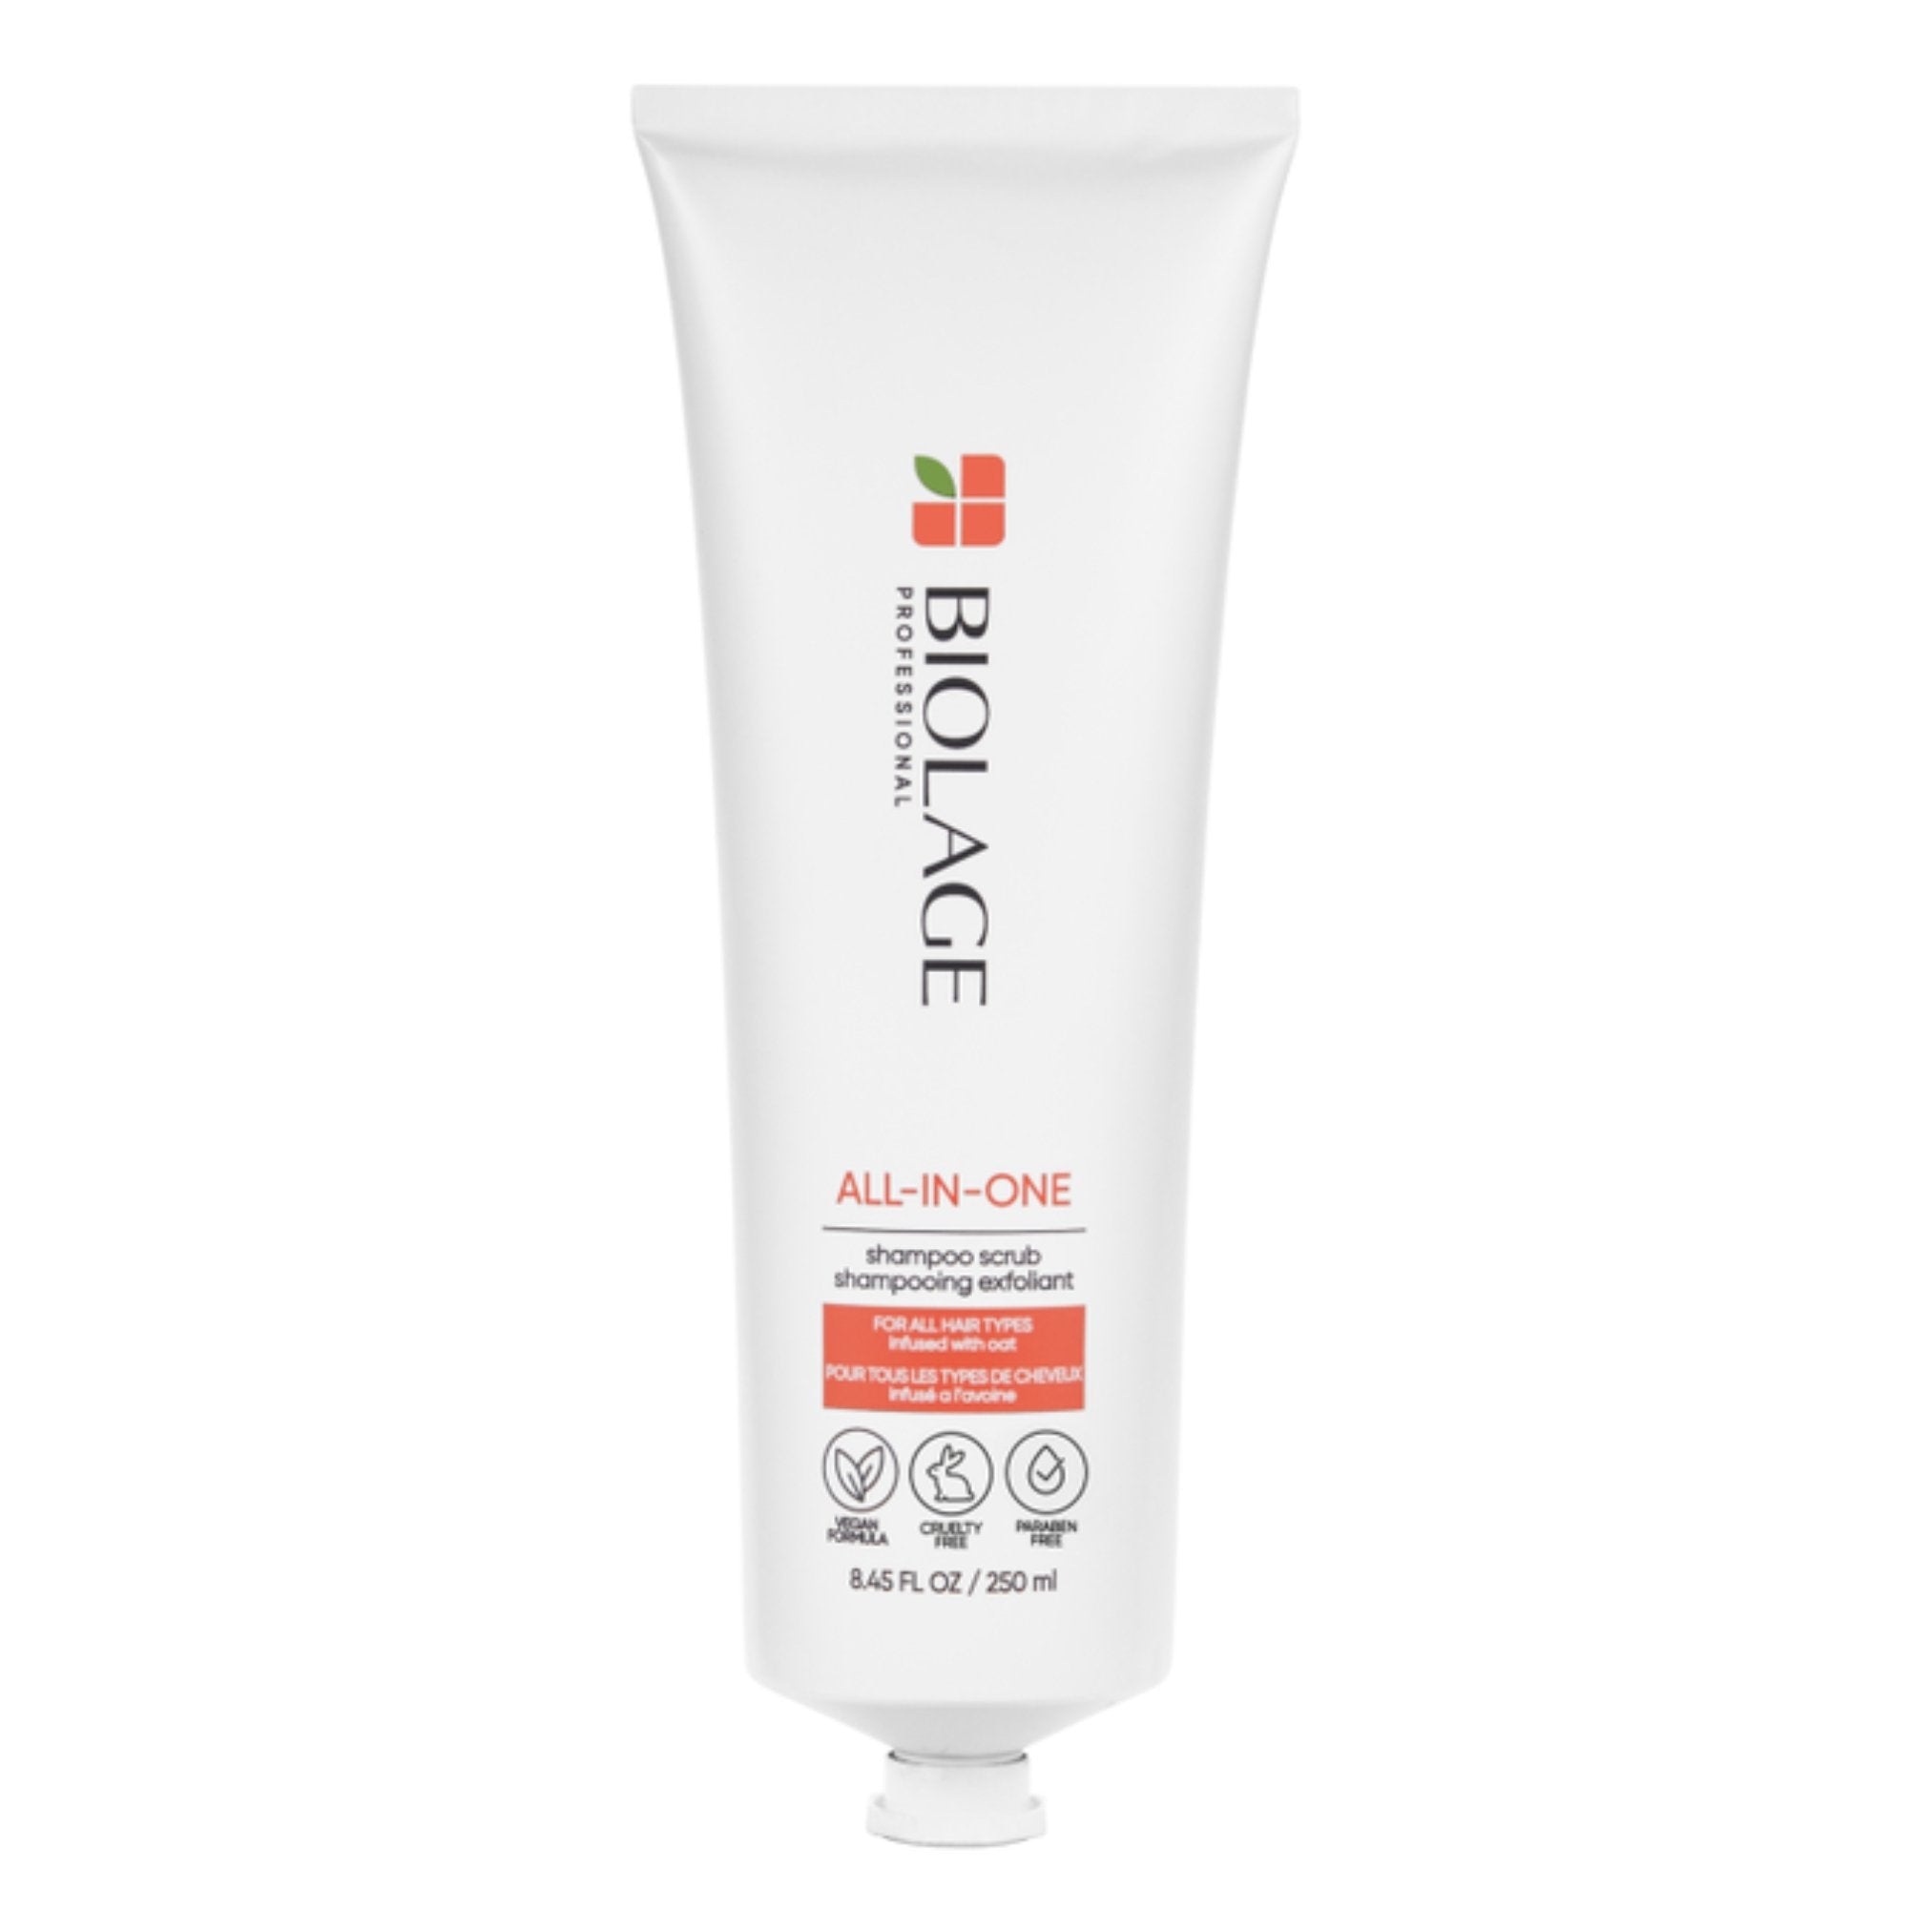 Biolage. Shampoing Exfoliant All-In-One - 250 ml - Concept C. Shop